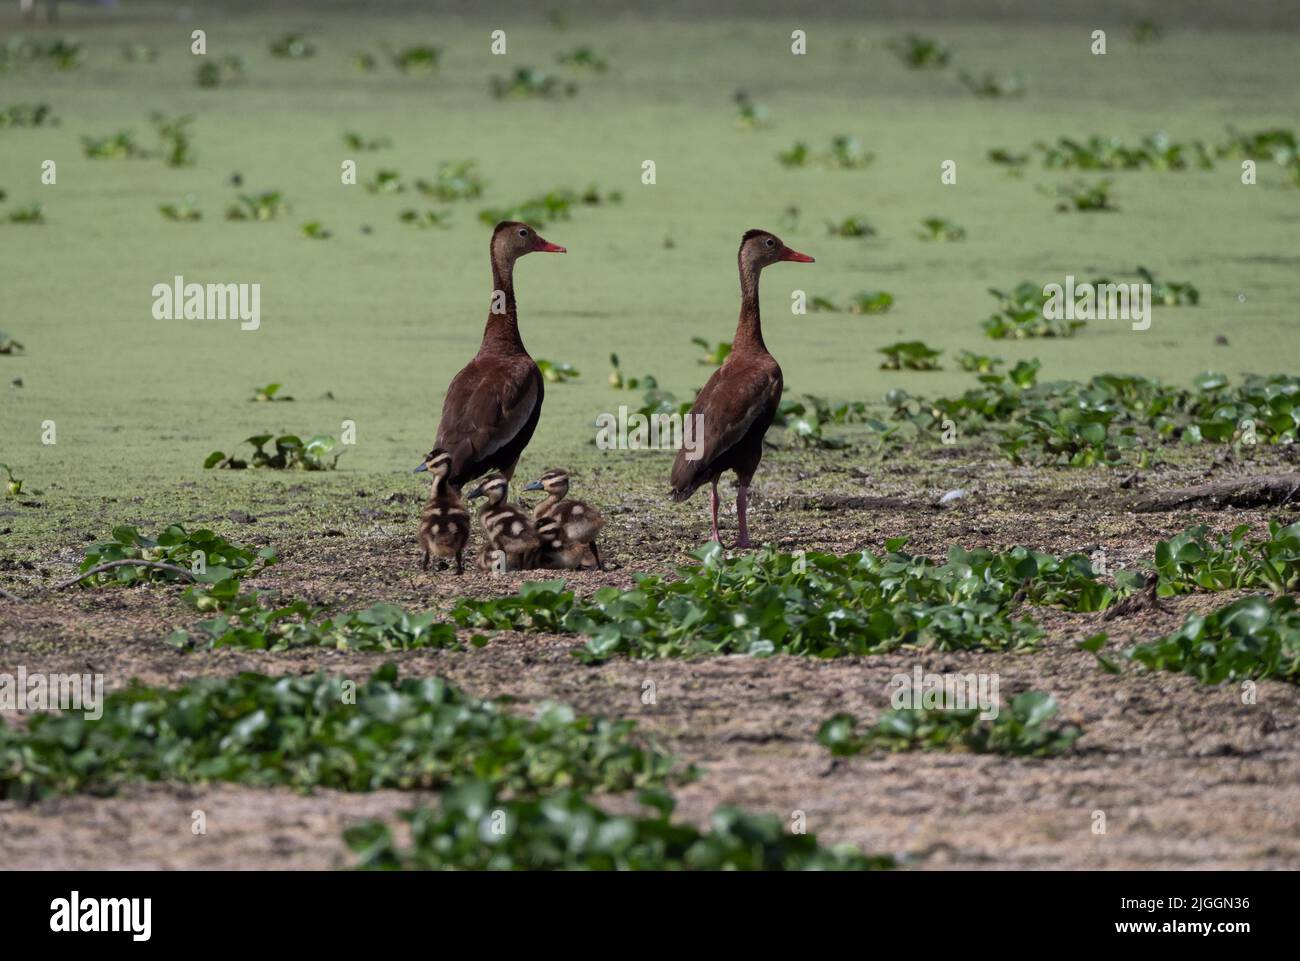 Breeding pair of black-bellied whistling ducks with five fluffy ducklings. Photographed in Texas with shallow depth of field. Stock Photo